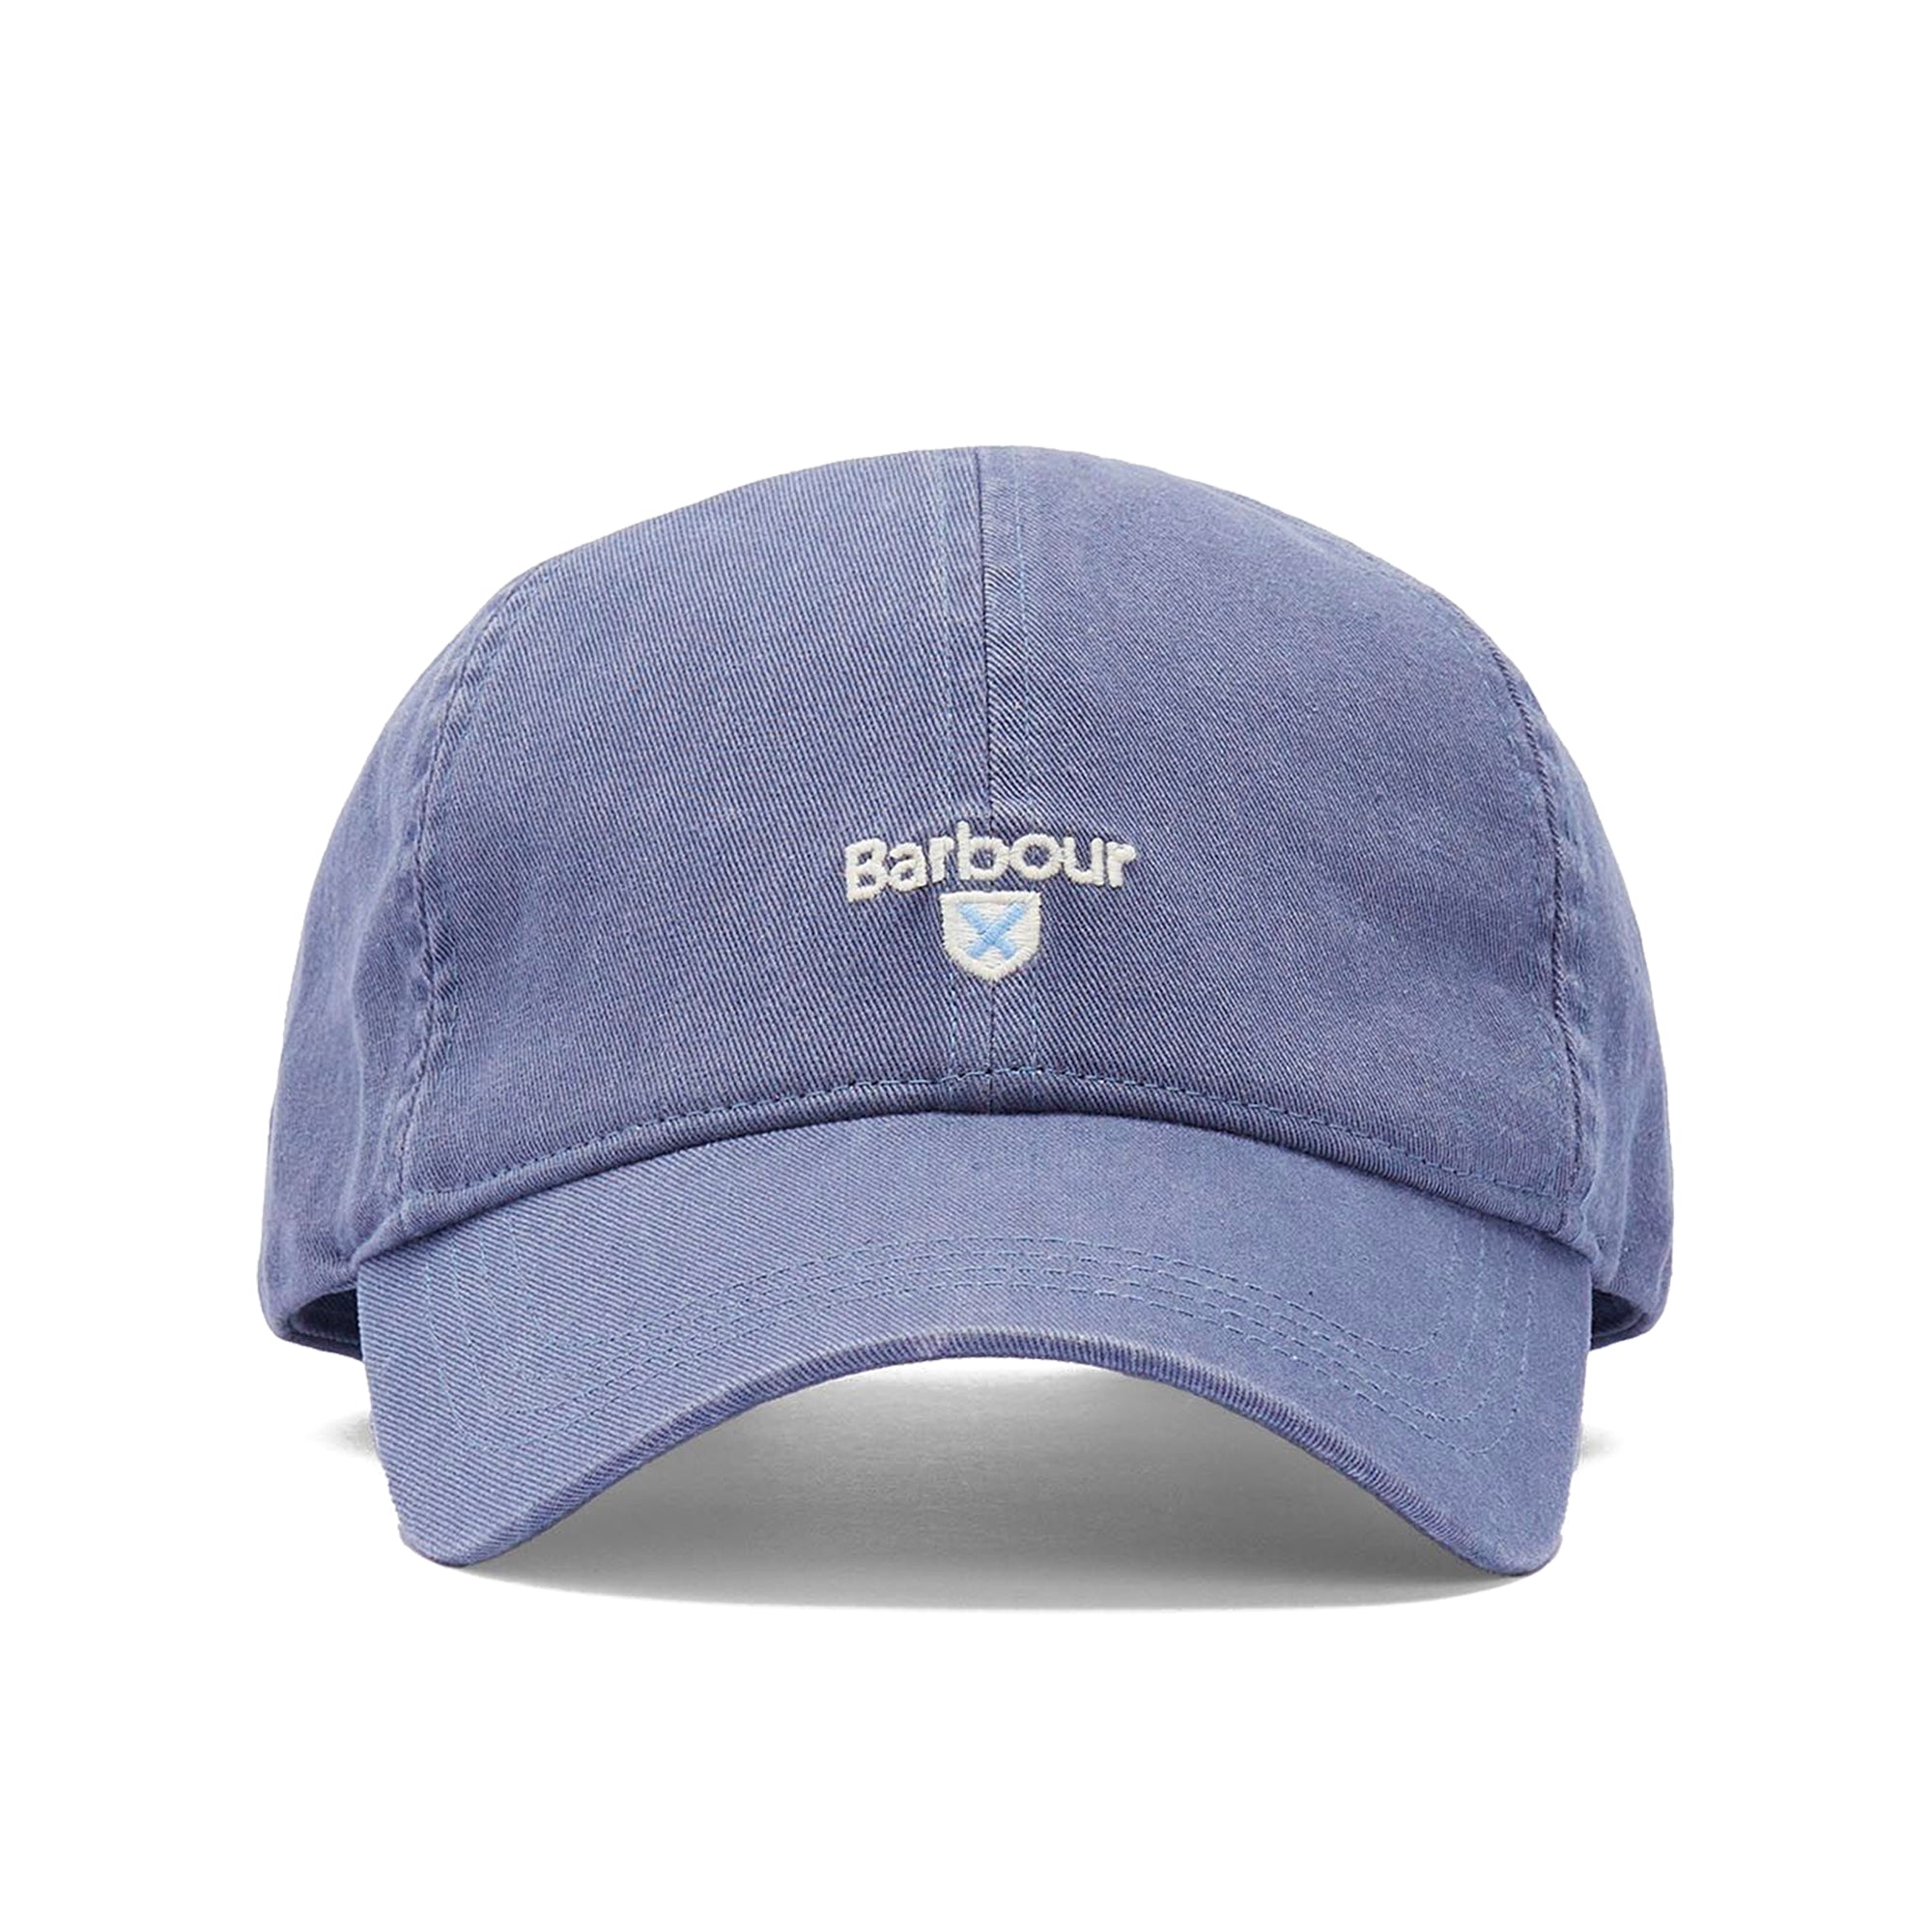 Barbour Cascade Washed Sports Cap - Washed Blue